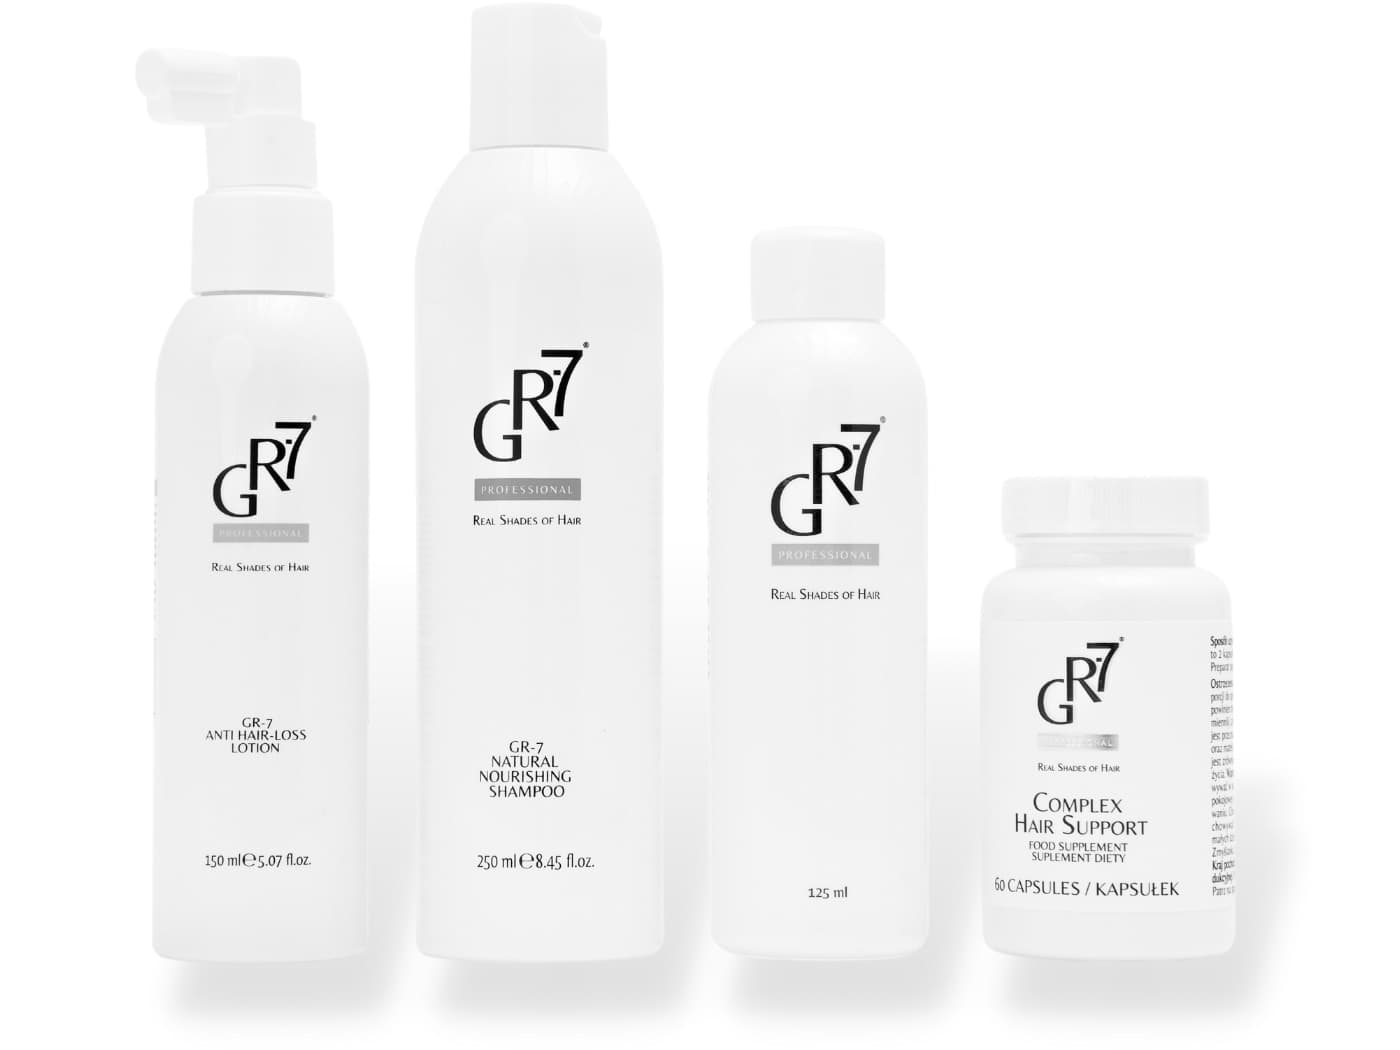 GR-7 whole range of products